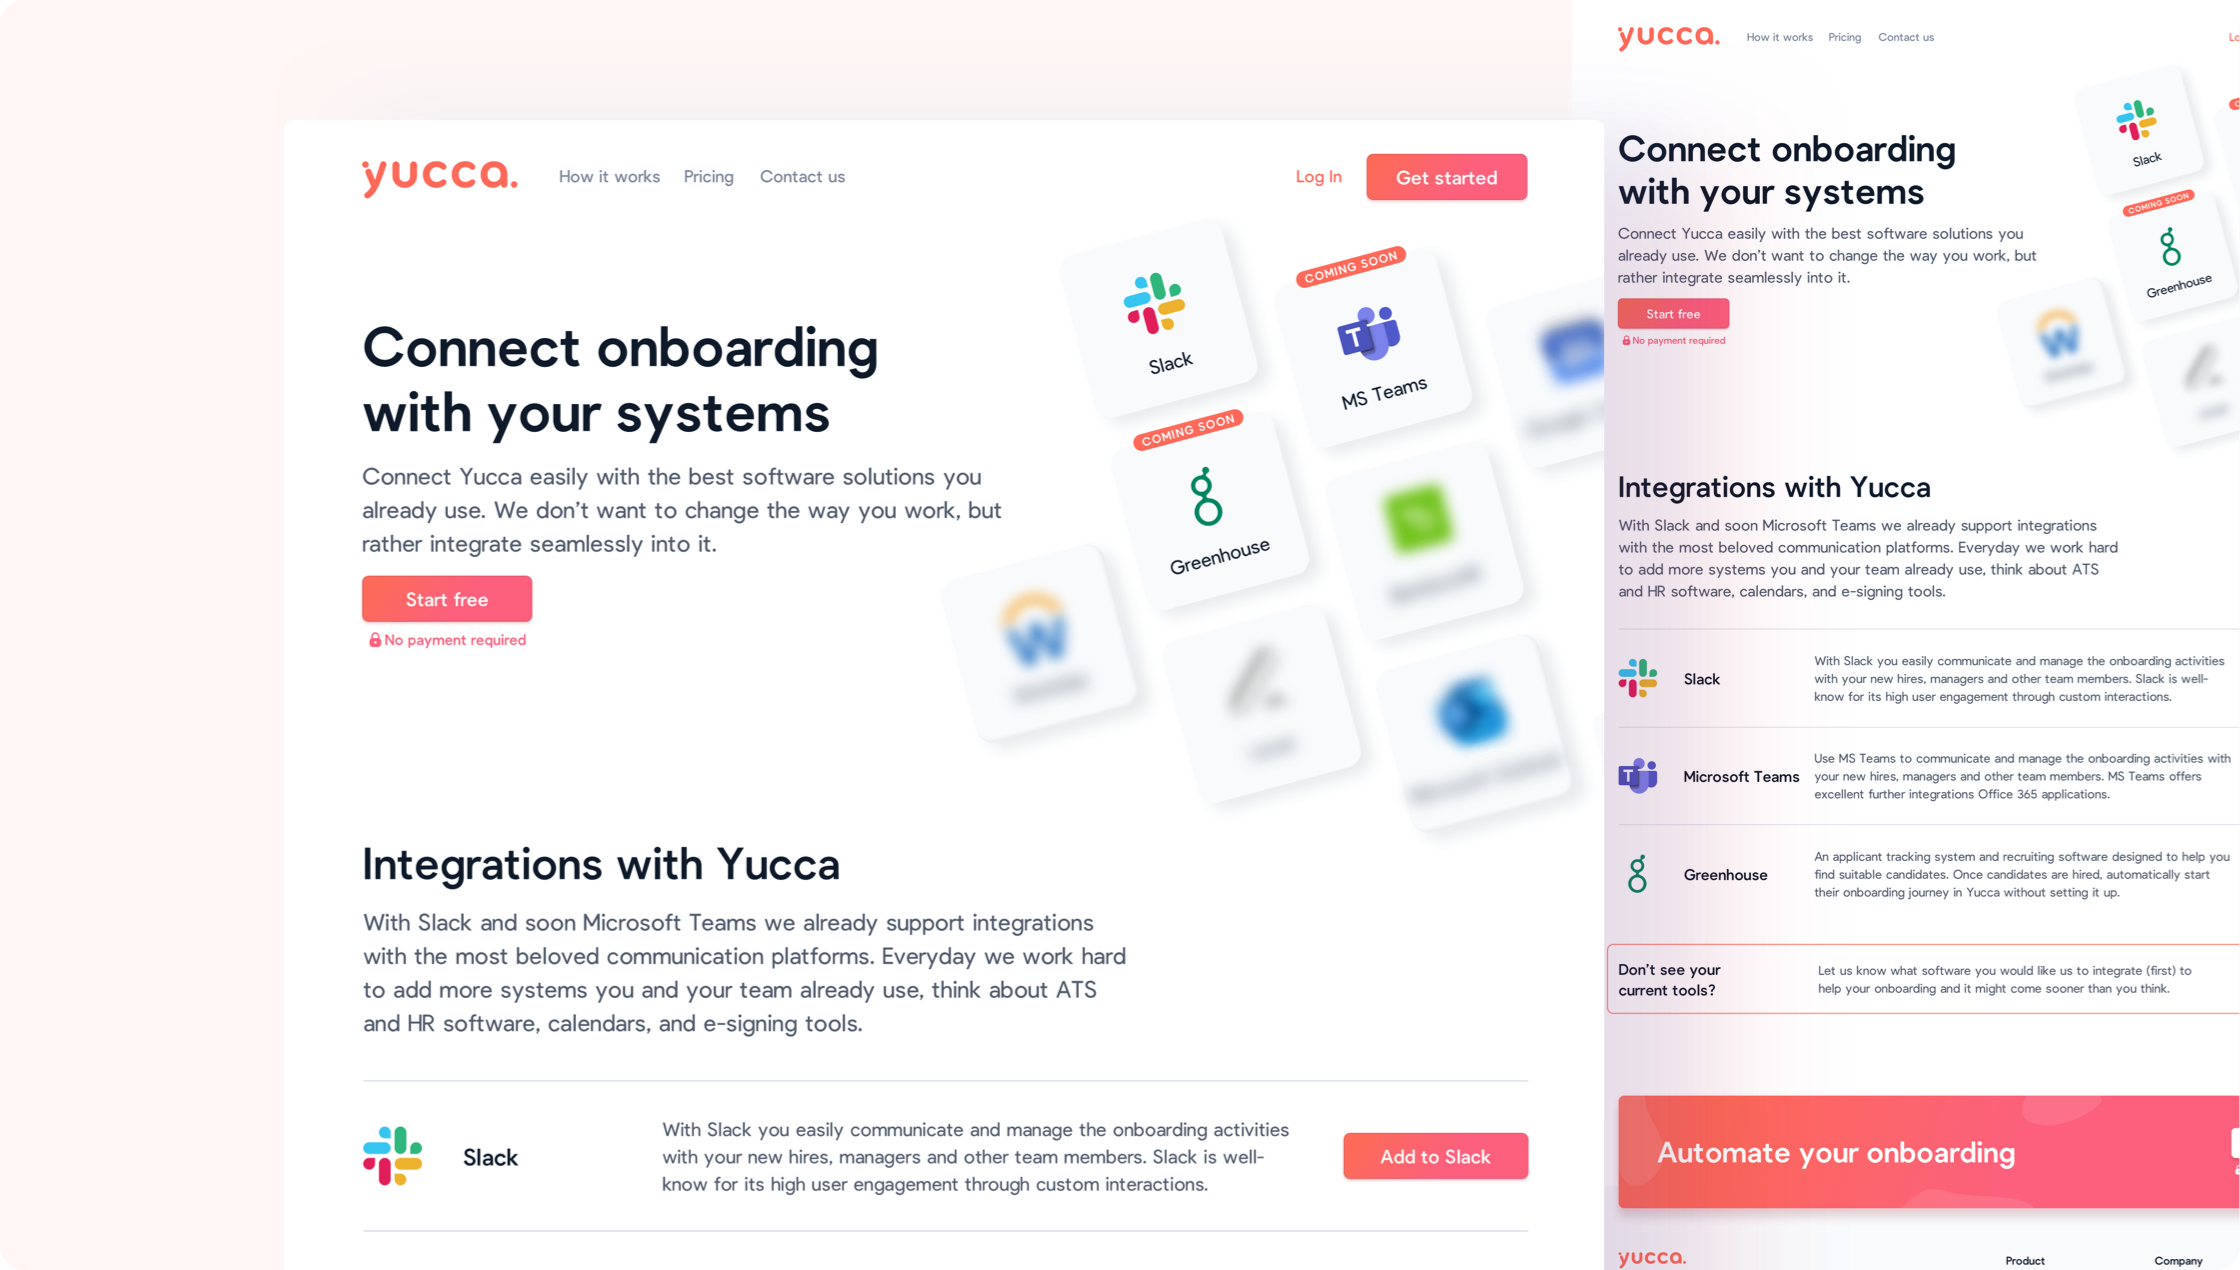 On this page users get an overview of all the integrations yucca offers.